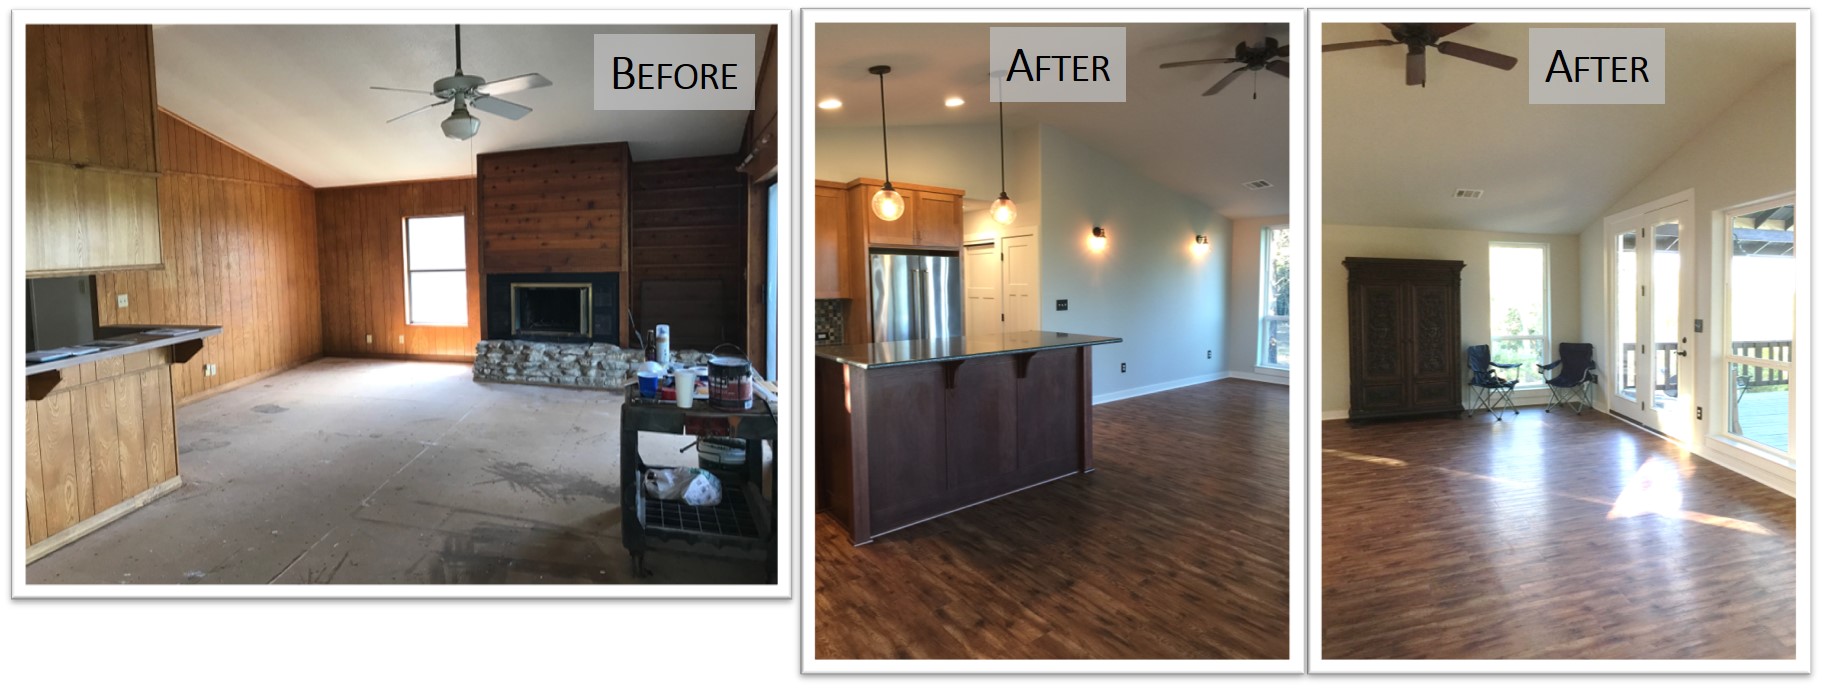 910 PLL, Interior LR, Before and After, Bear Creek Homes.jpg